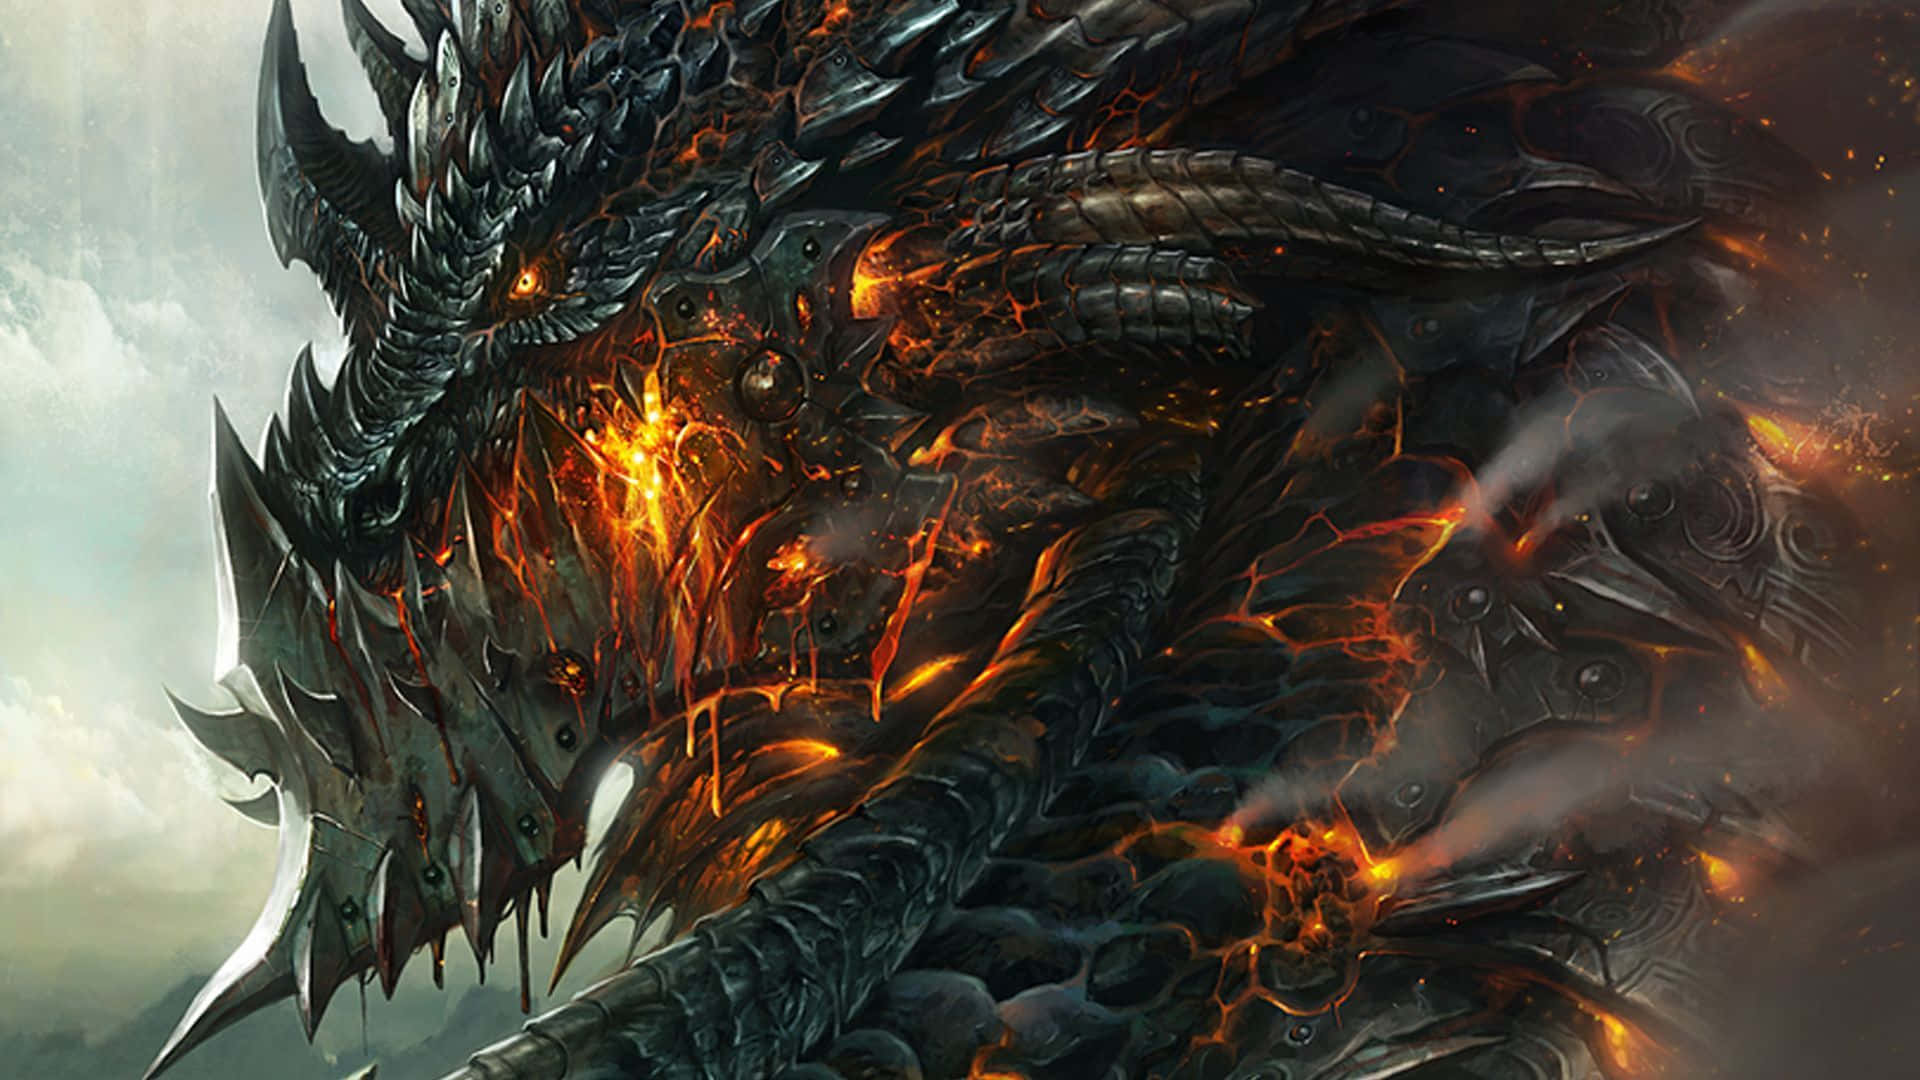 Encounter the 'Awesome Cool Dragon' Wallpaper